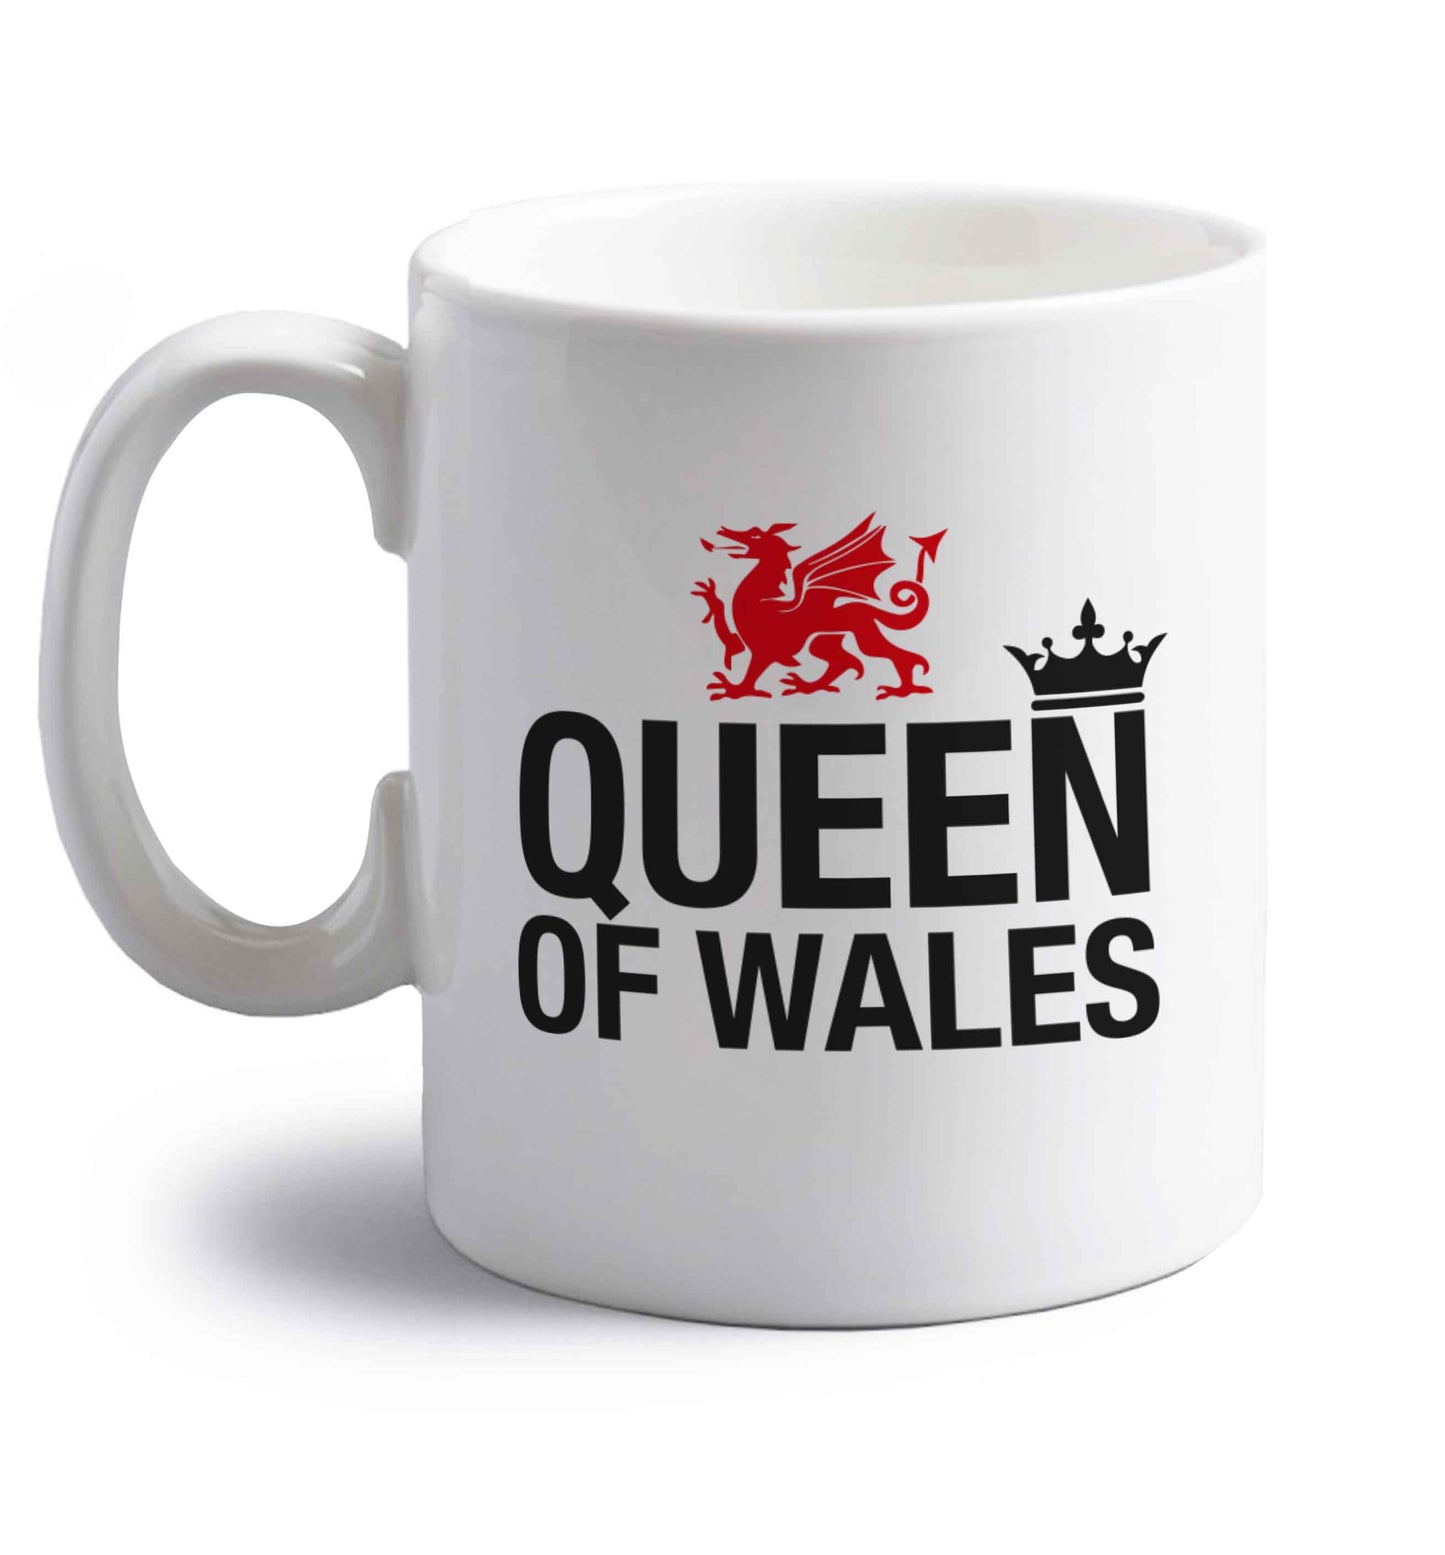 Queen of Wales right handed white ceramic mug 